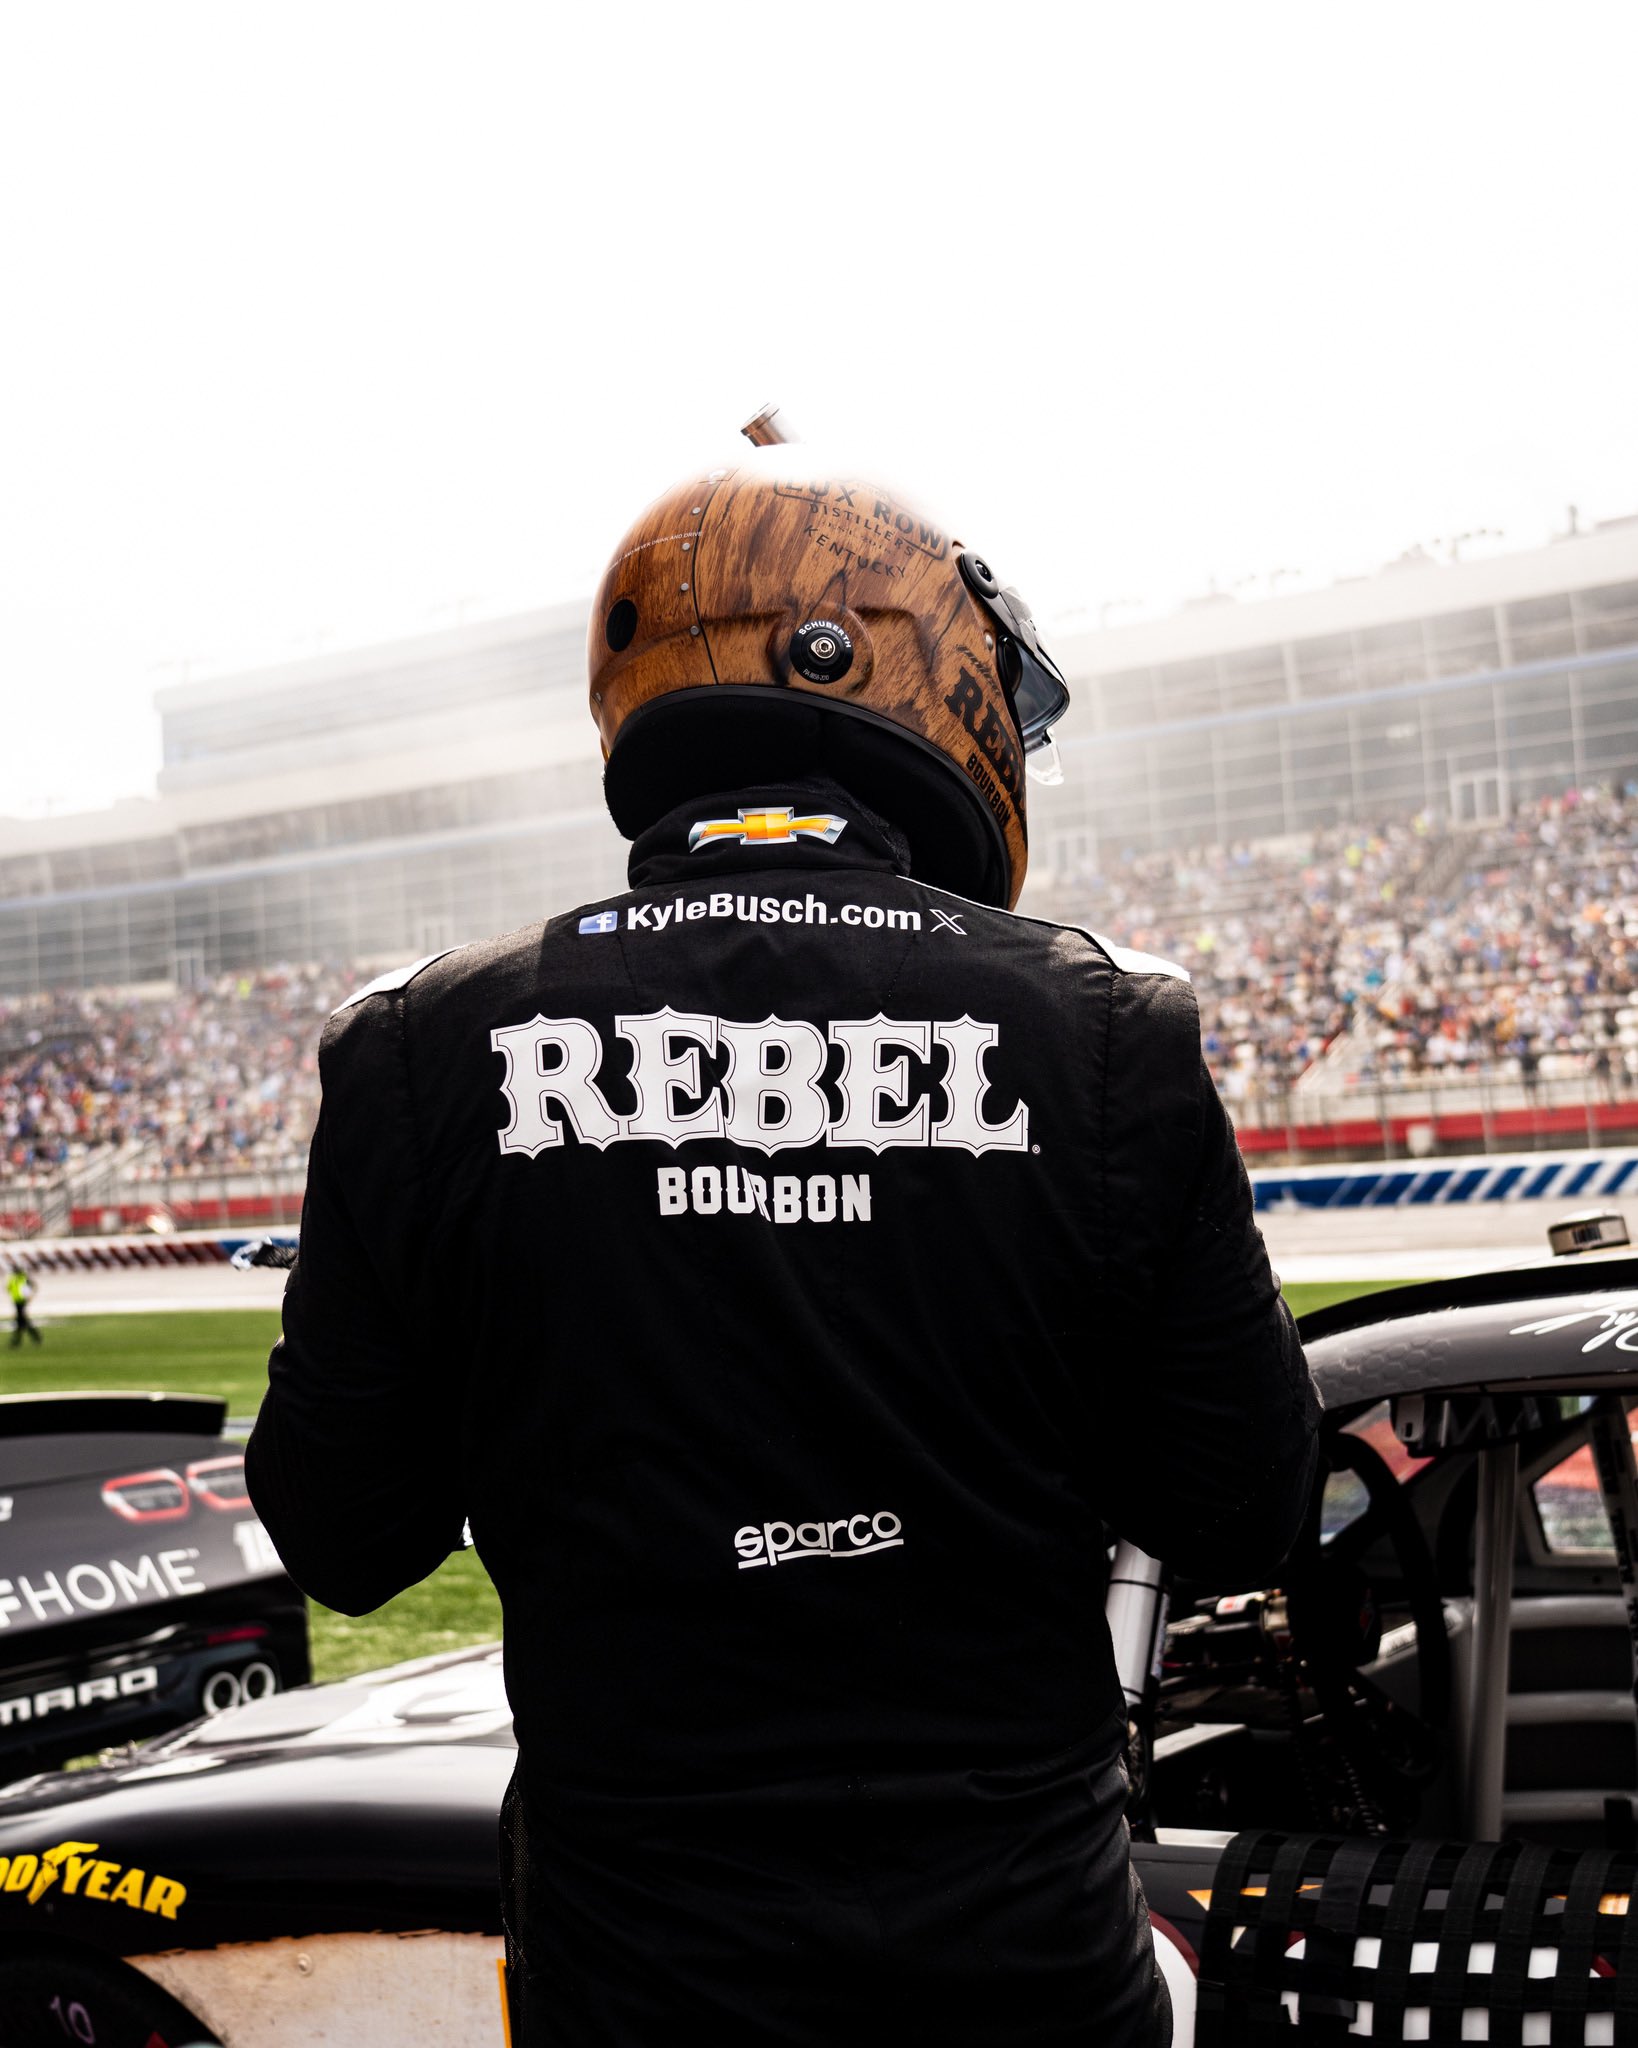 Rebel Bourbon On-Track with Kyle Busch for this Weekend’s NASCAR “Enjoy Illinois 300”